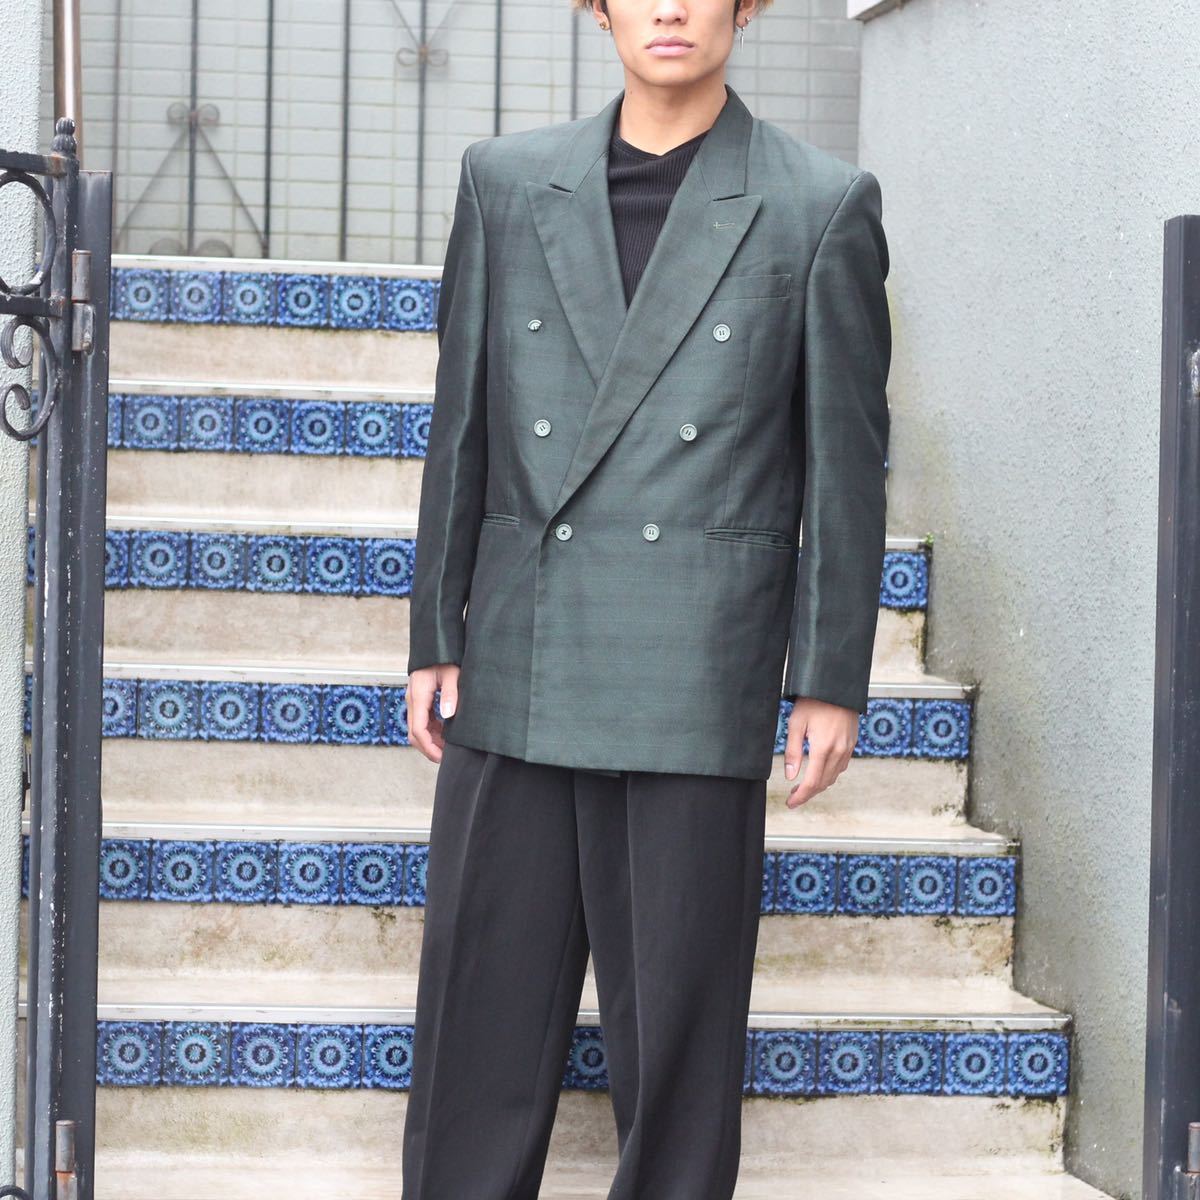 USA VINTAGE CHECK PATTERNED GREEN COLOR DOUBLE TAILORED  JACKET/アメリカ古着グリーンカラーダブルテーラードジャケット